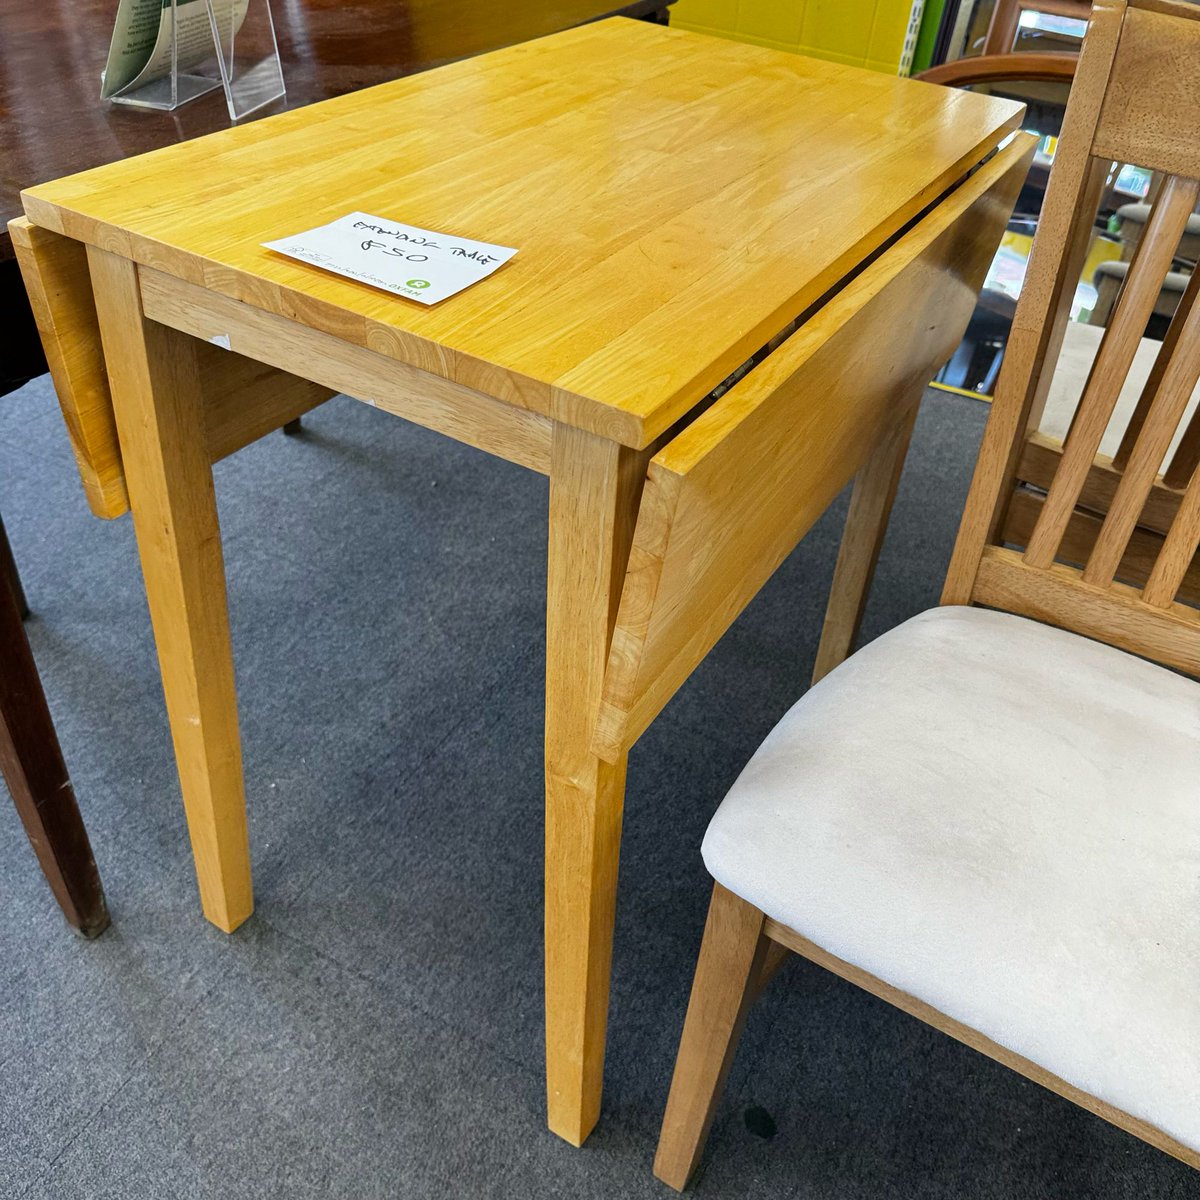 Folding Table £40
We are in need of good condition donations to continue our work. We operate a local collection service for large furniture, call the shop 02380 779580. #secondhandfurniture #southampton #retrofurniture #charityshops #foundinoxfam #shirley #oxfamshops #furniture